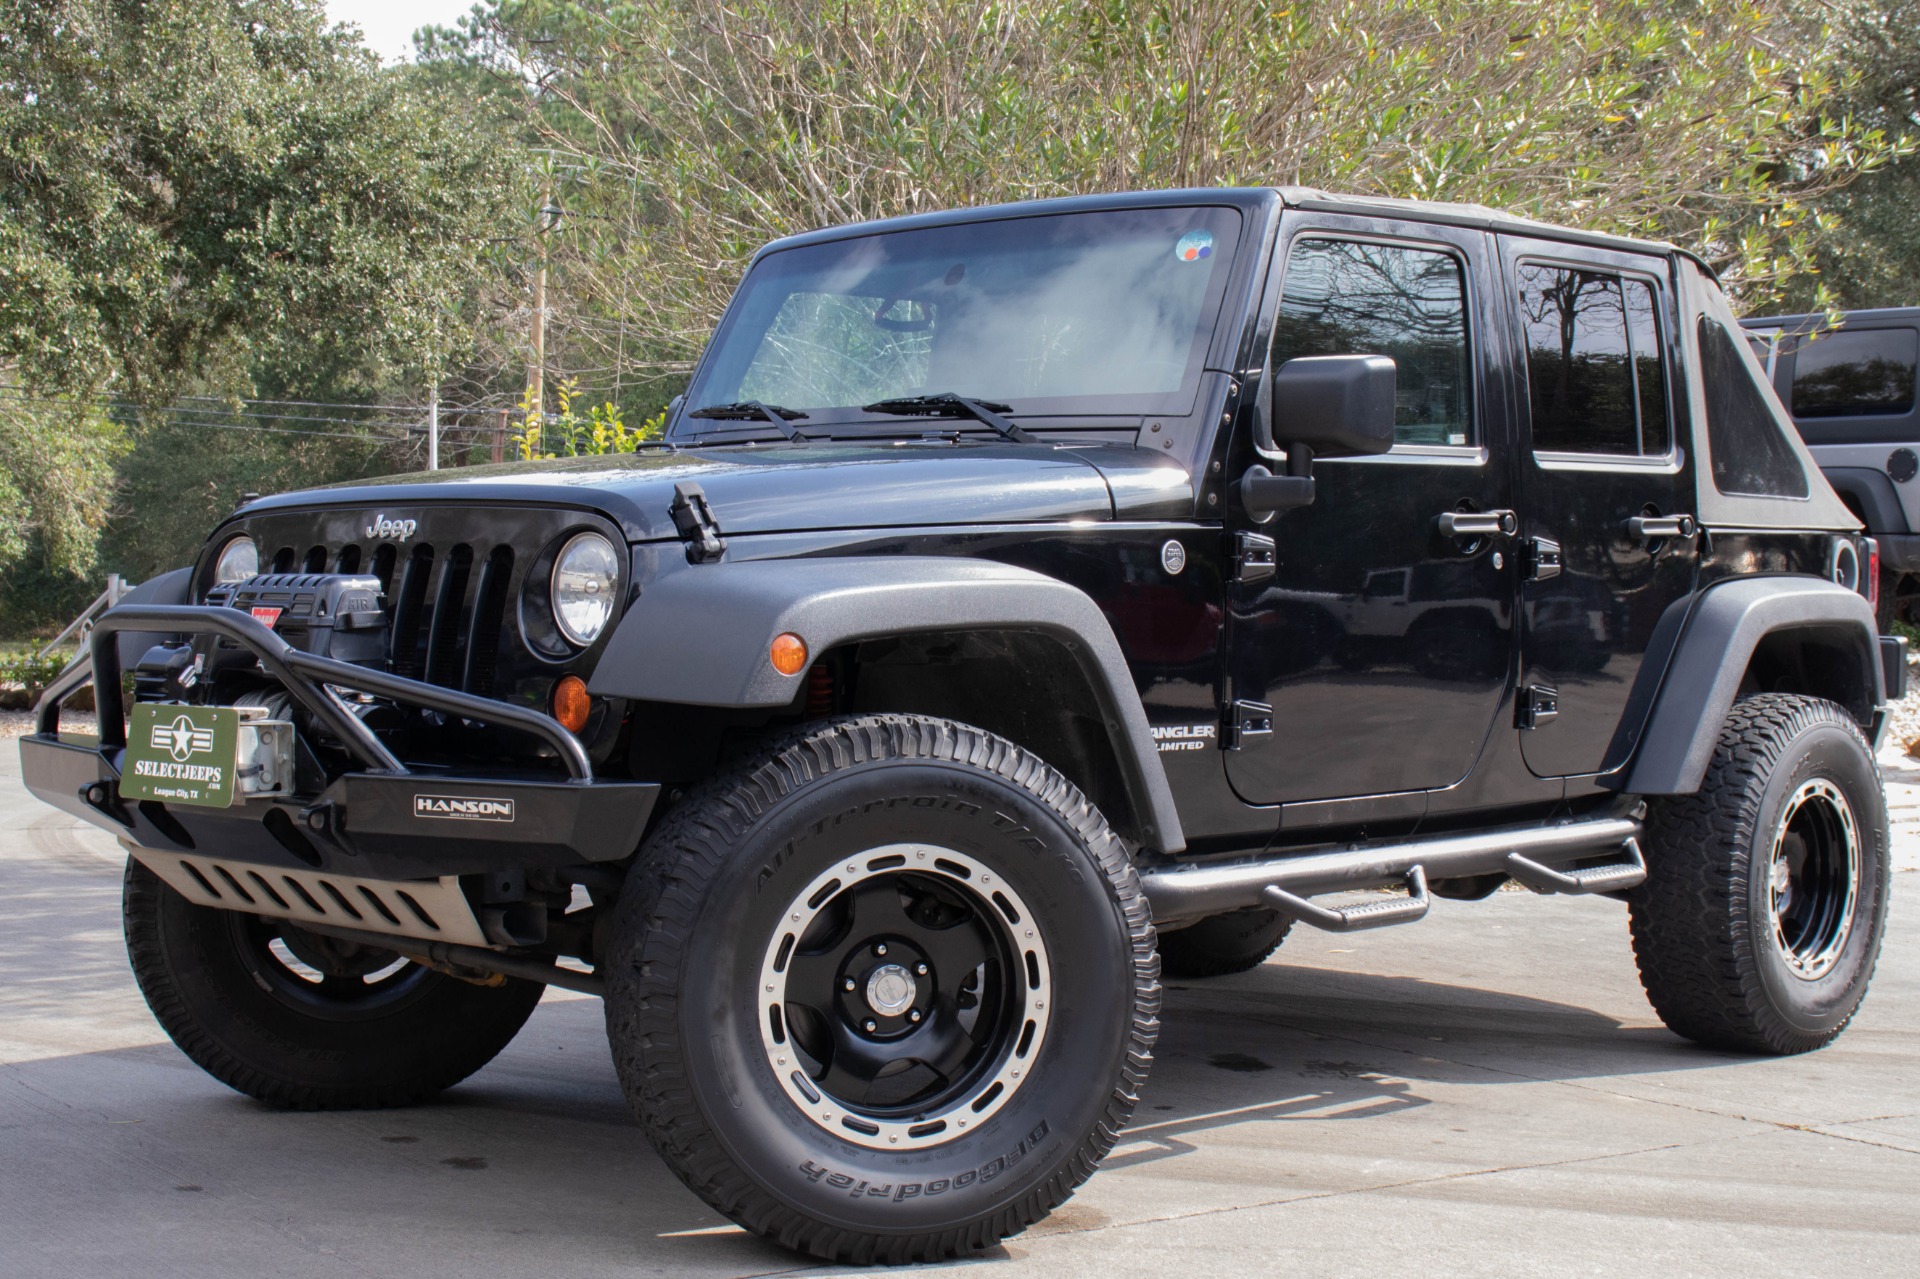 Used 2007 Jeep Wrangler Unlimited X For Sale ($16,995) | Select Jeeps Inc.  Stock #101145